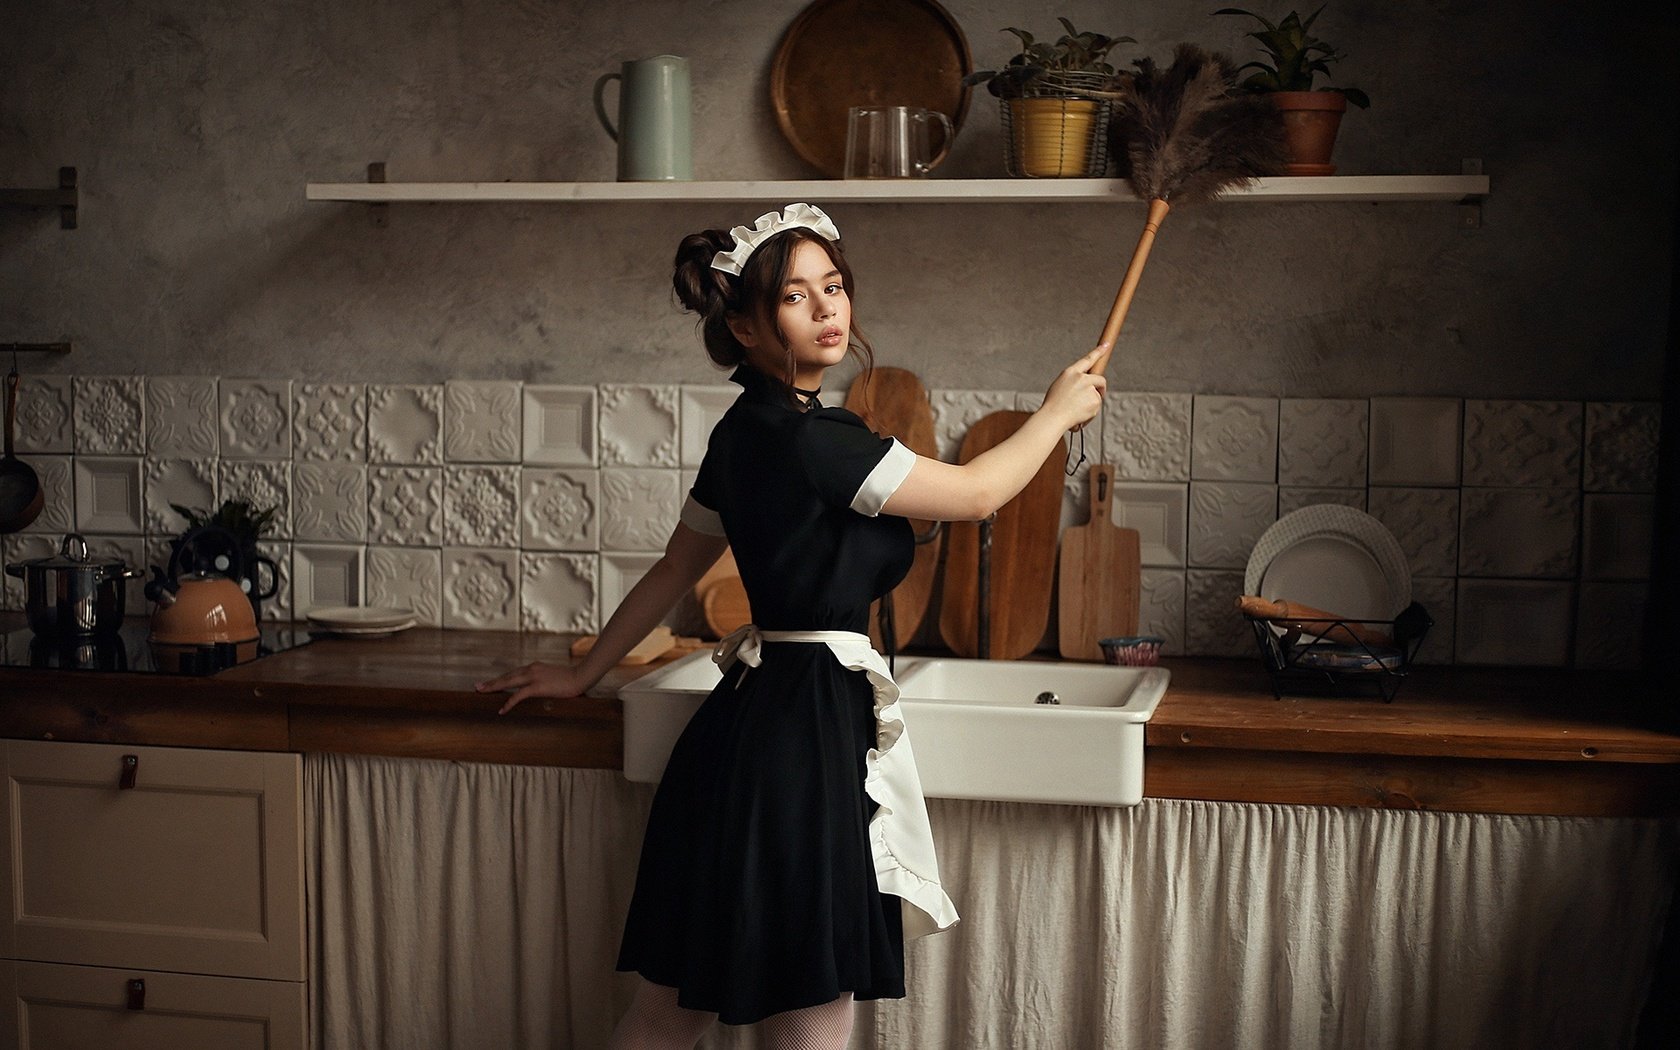 Personal maid